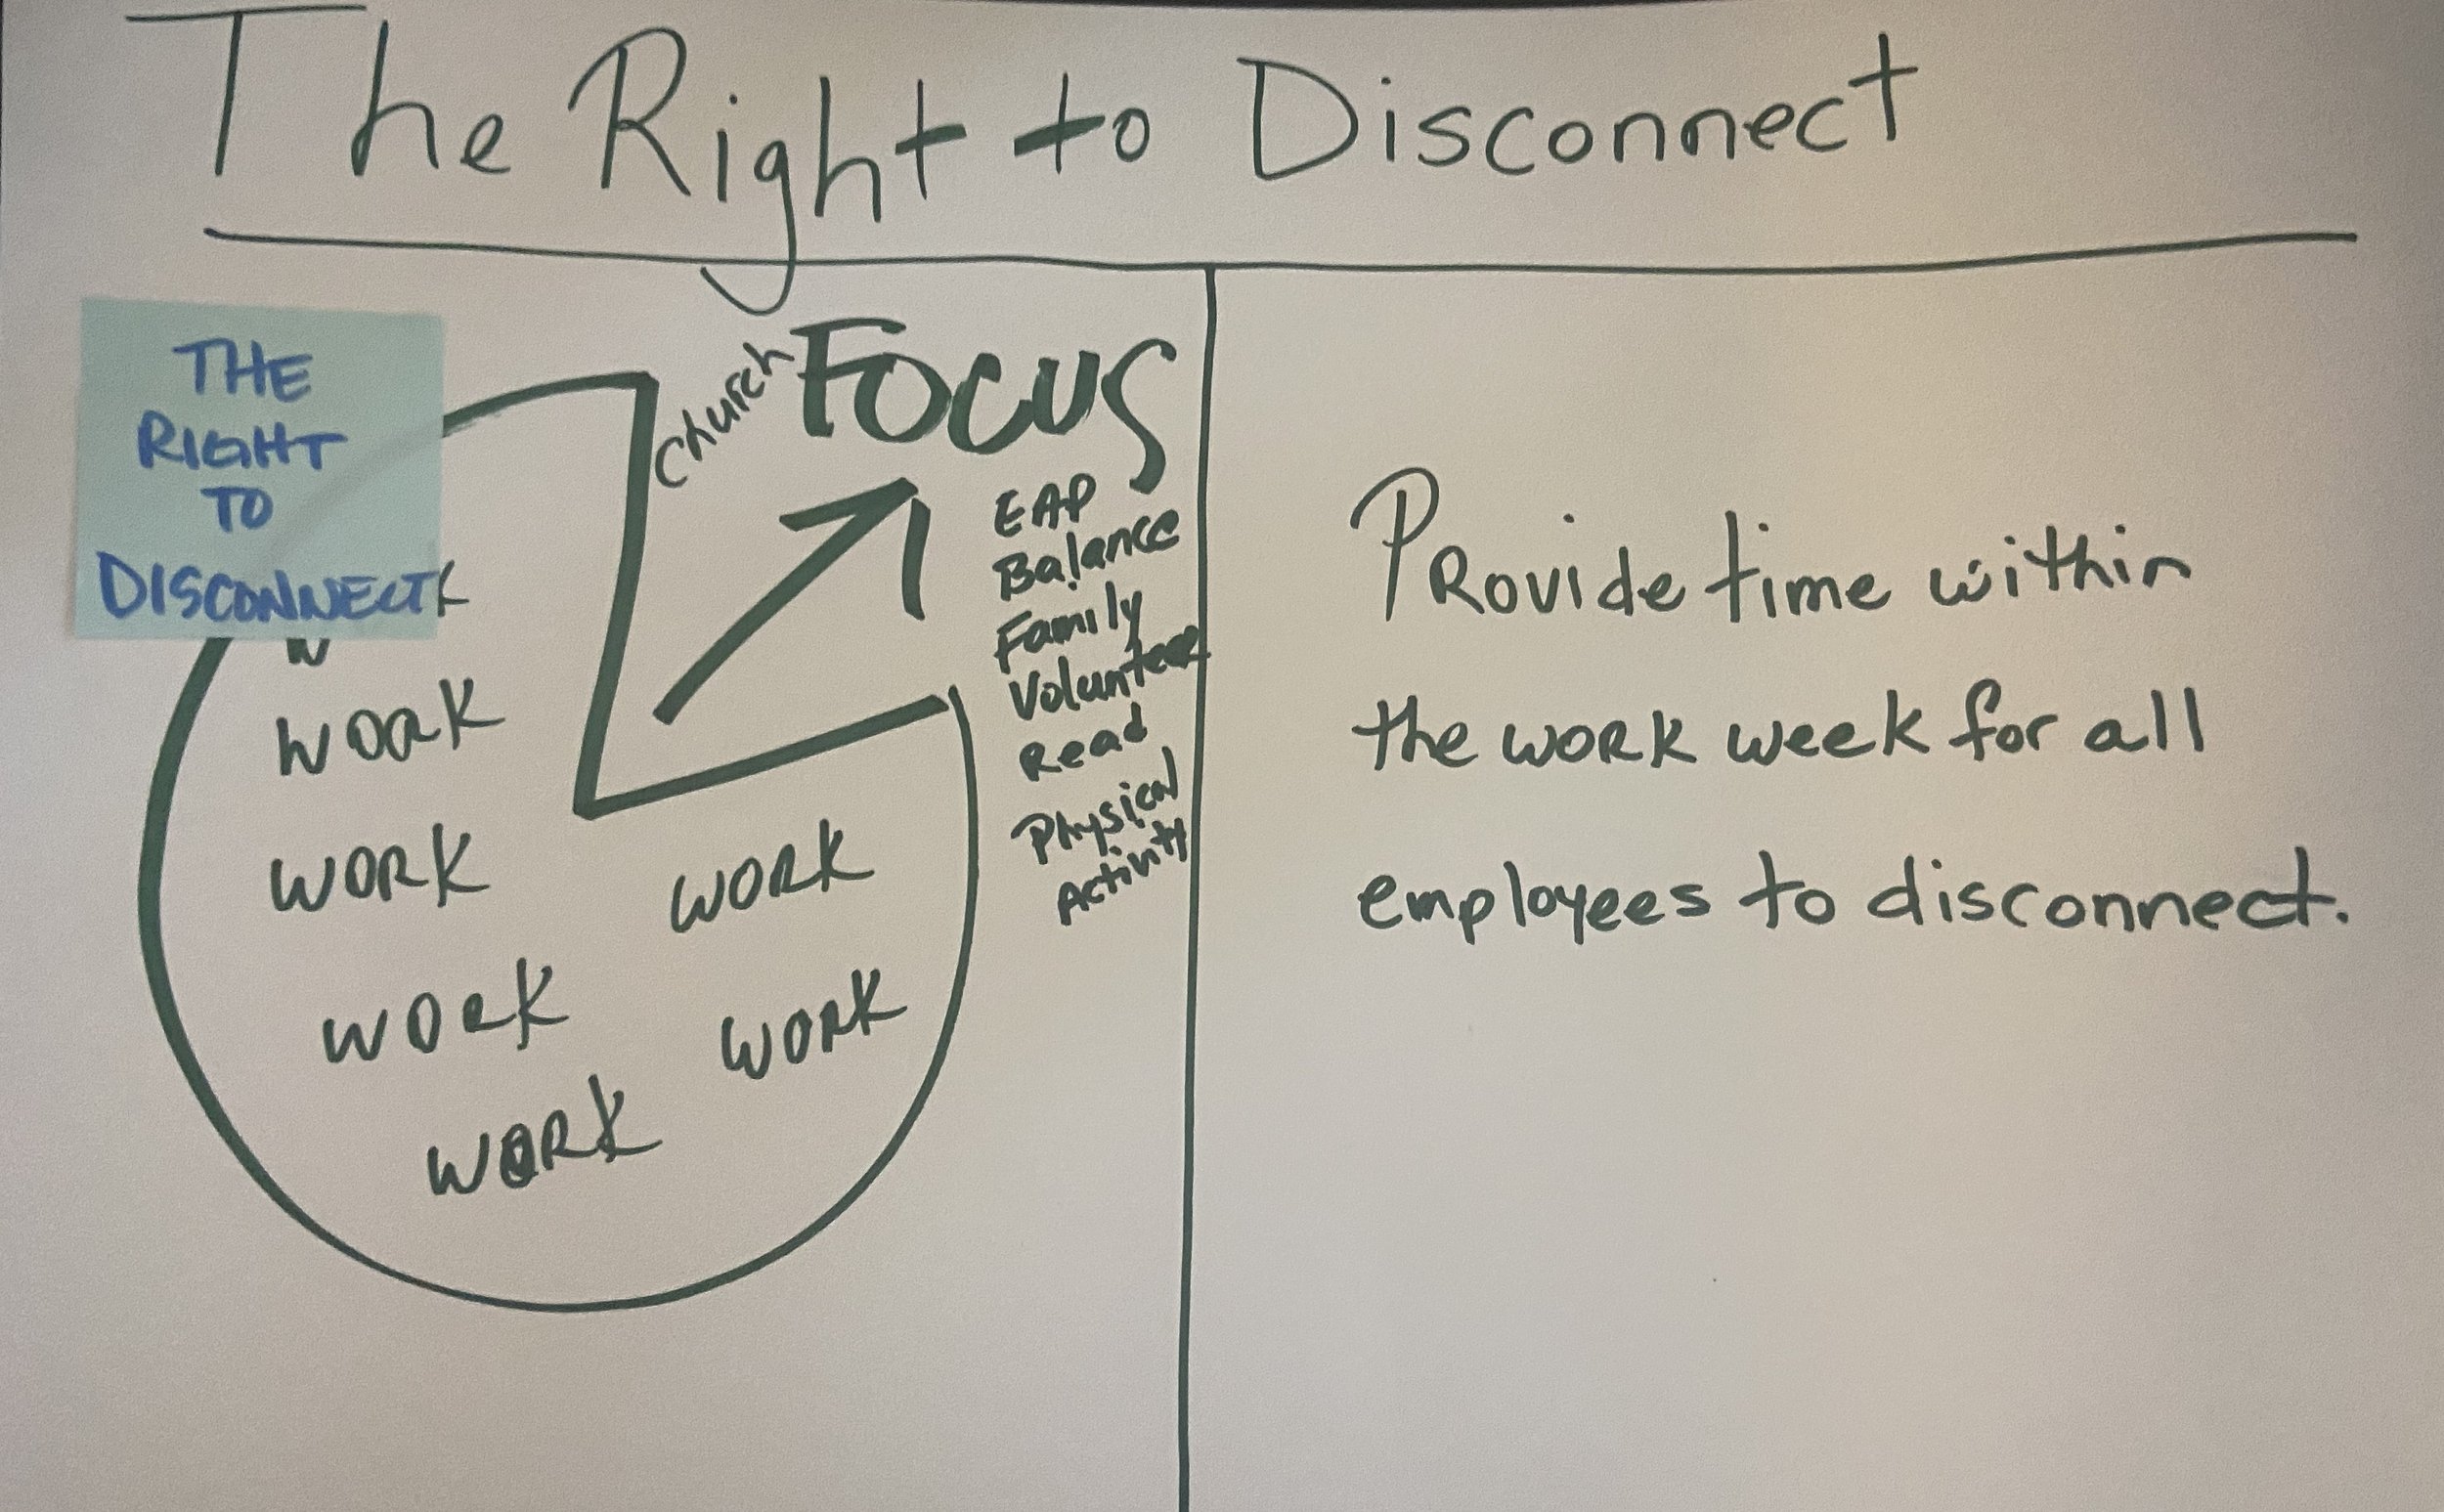 THE RIGHT TO DISCONNECT